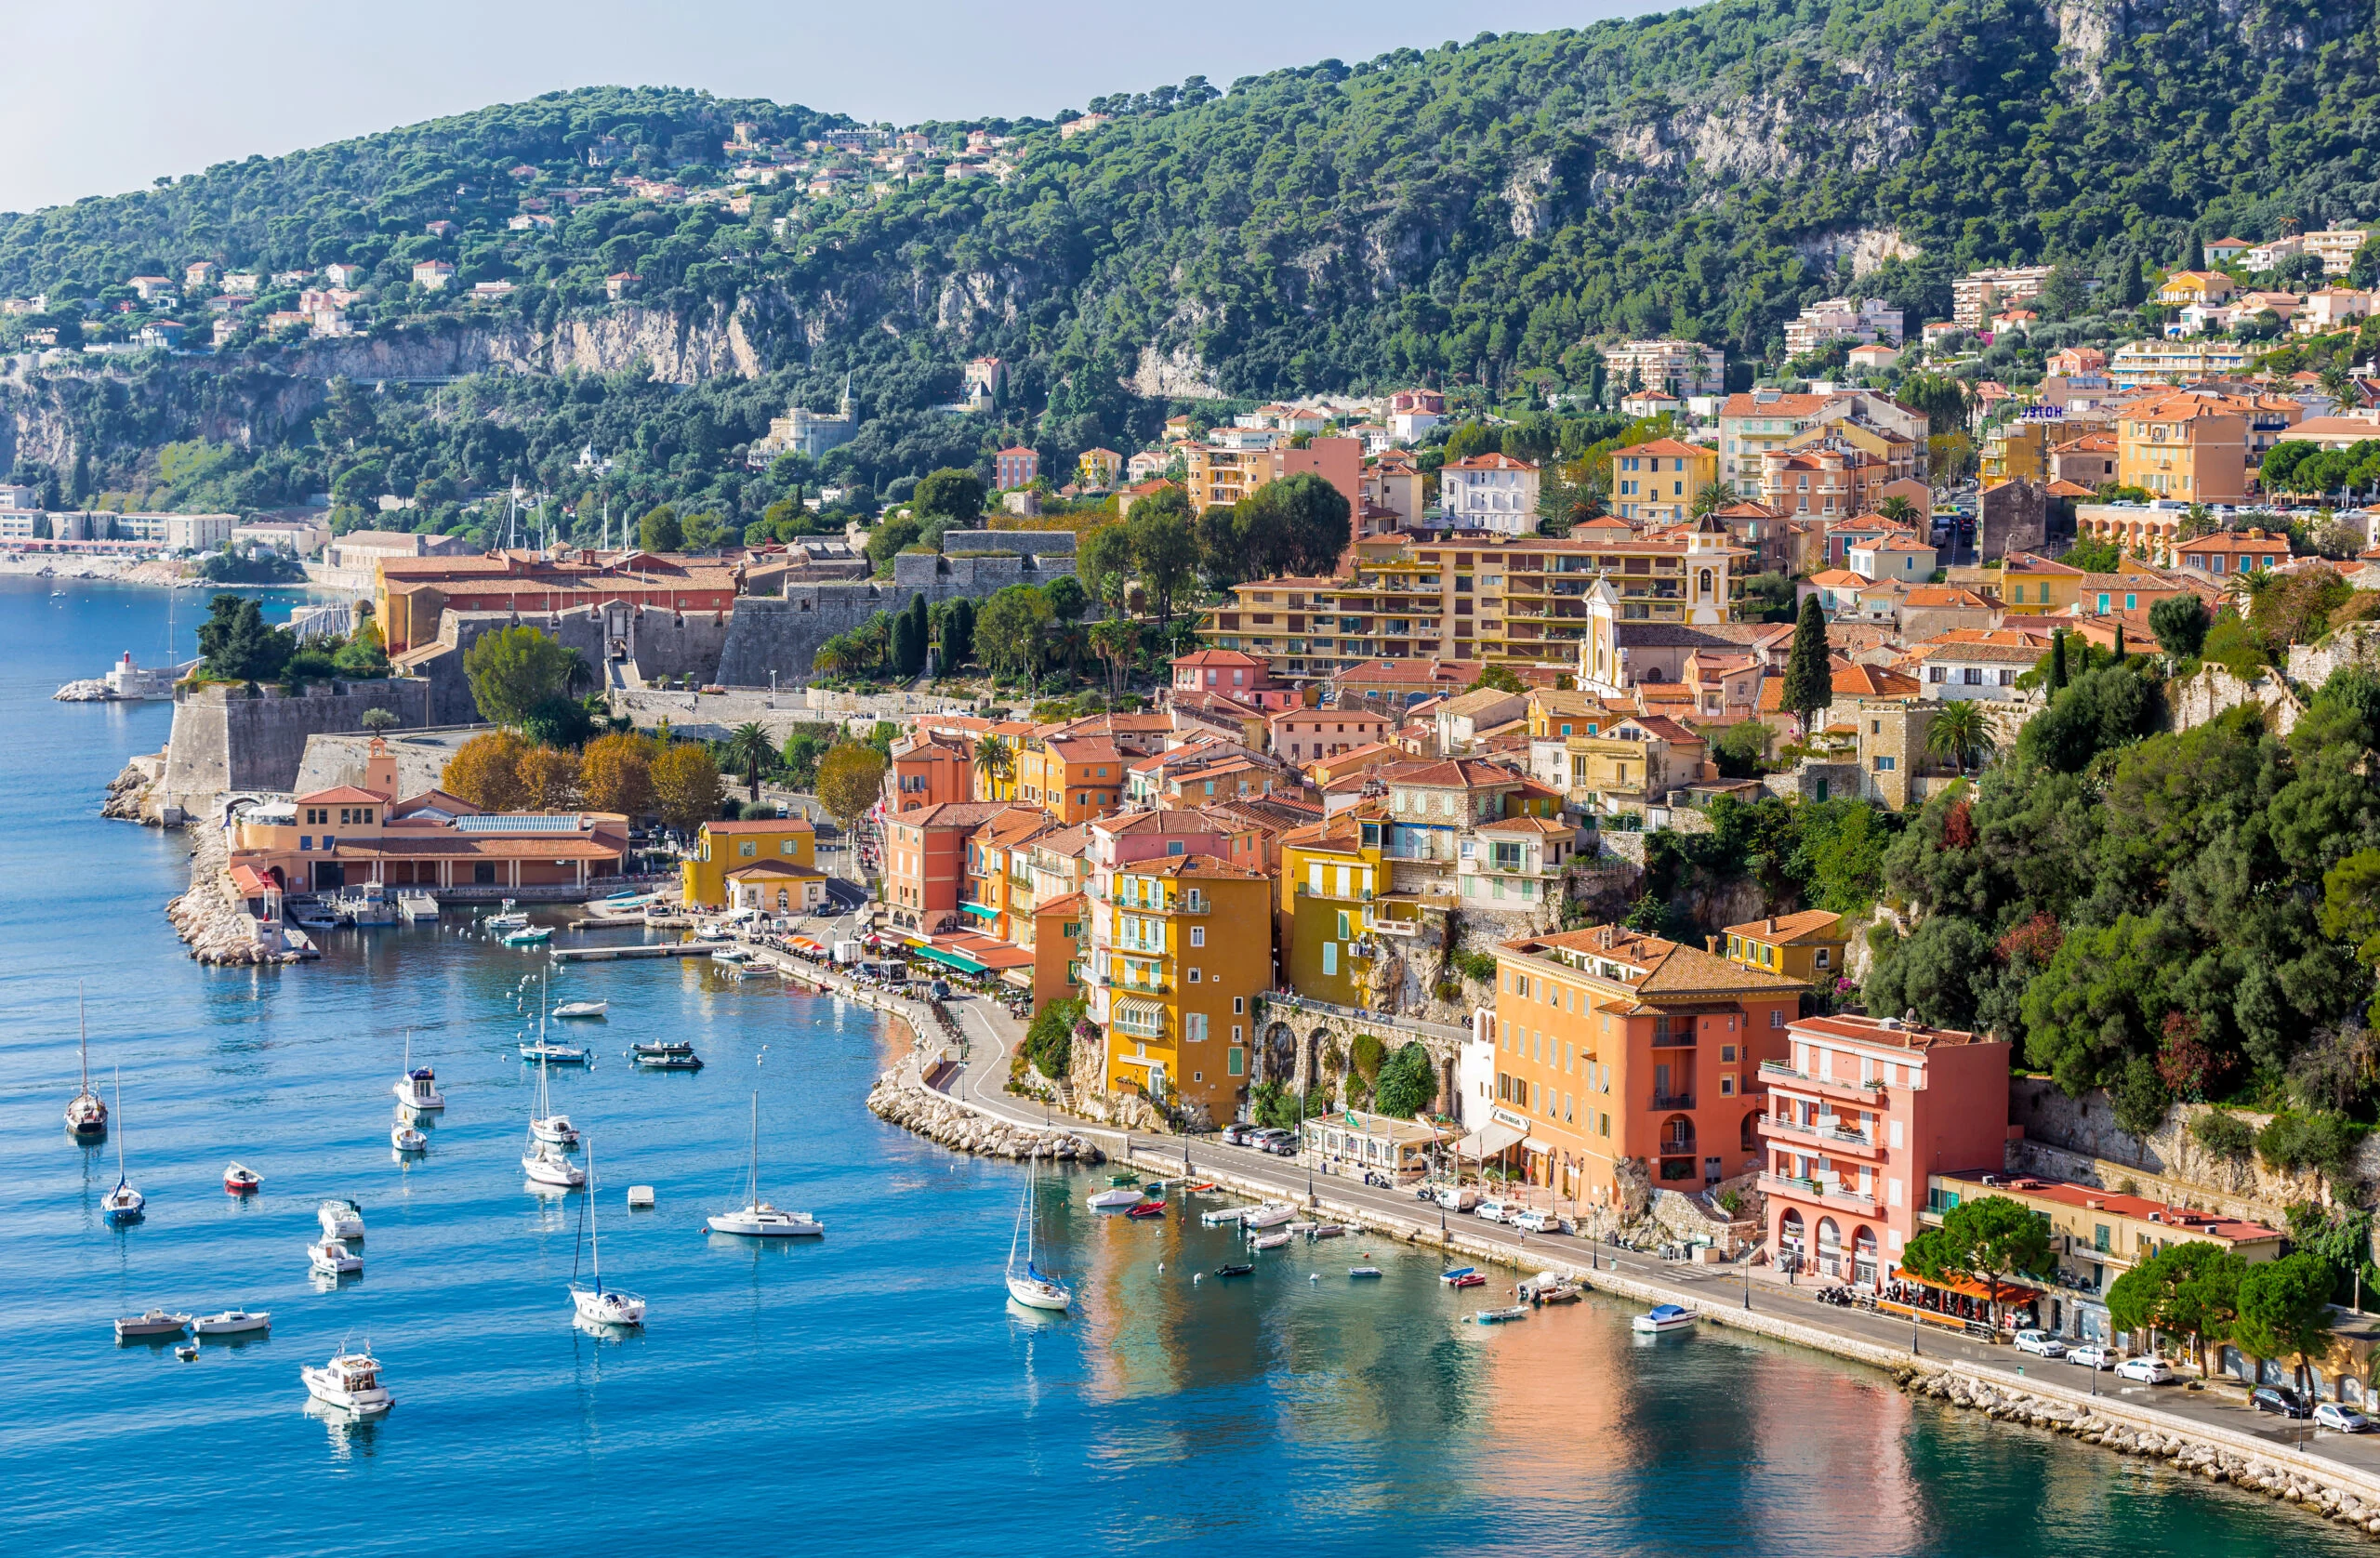 Best Day trips from Nice, France